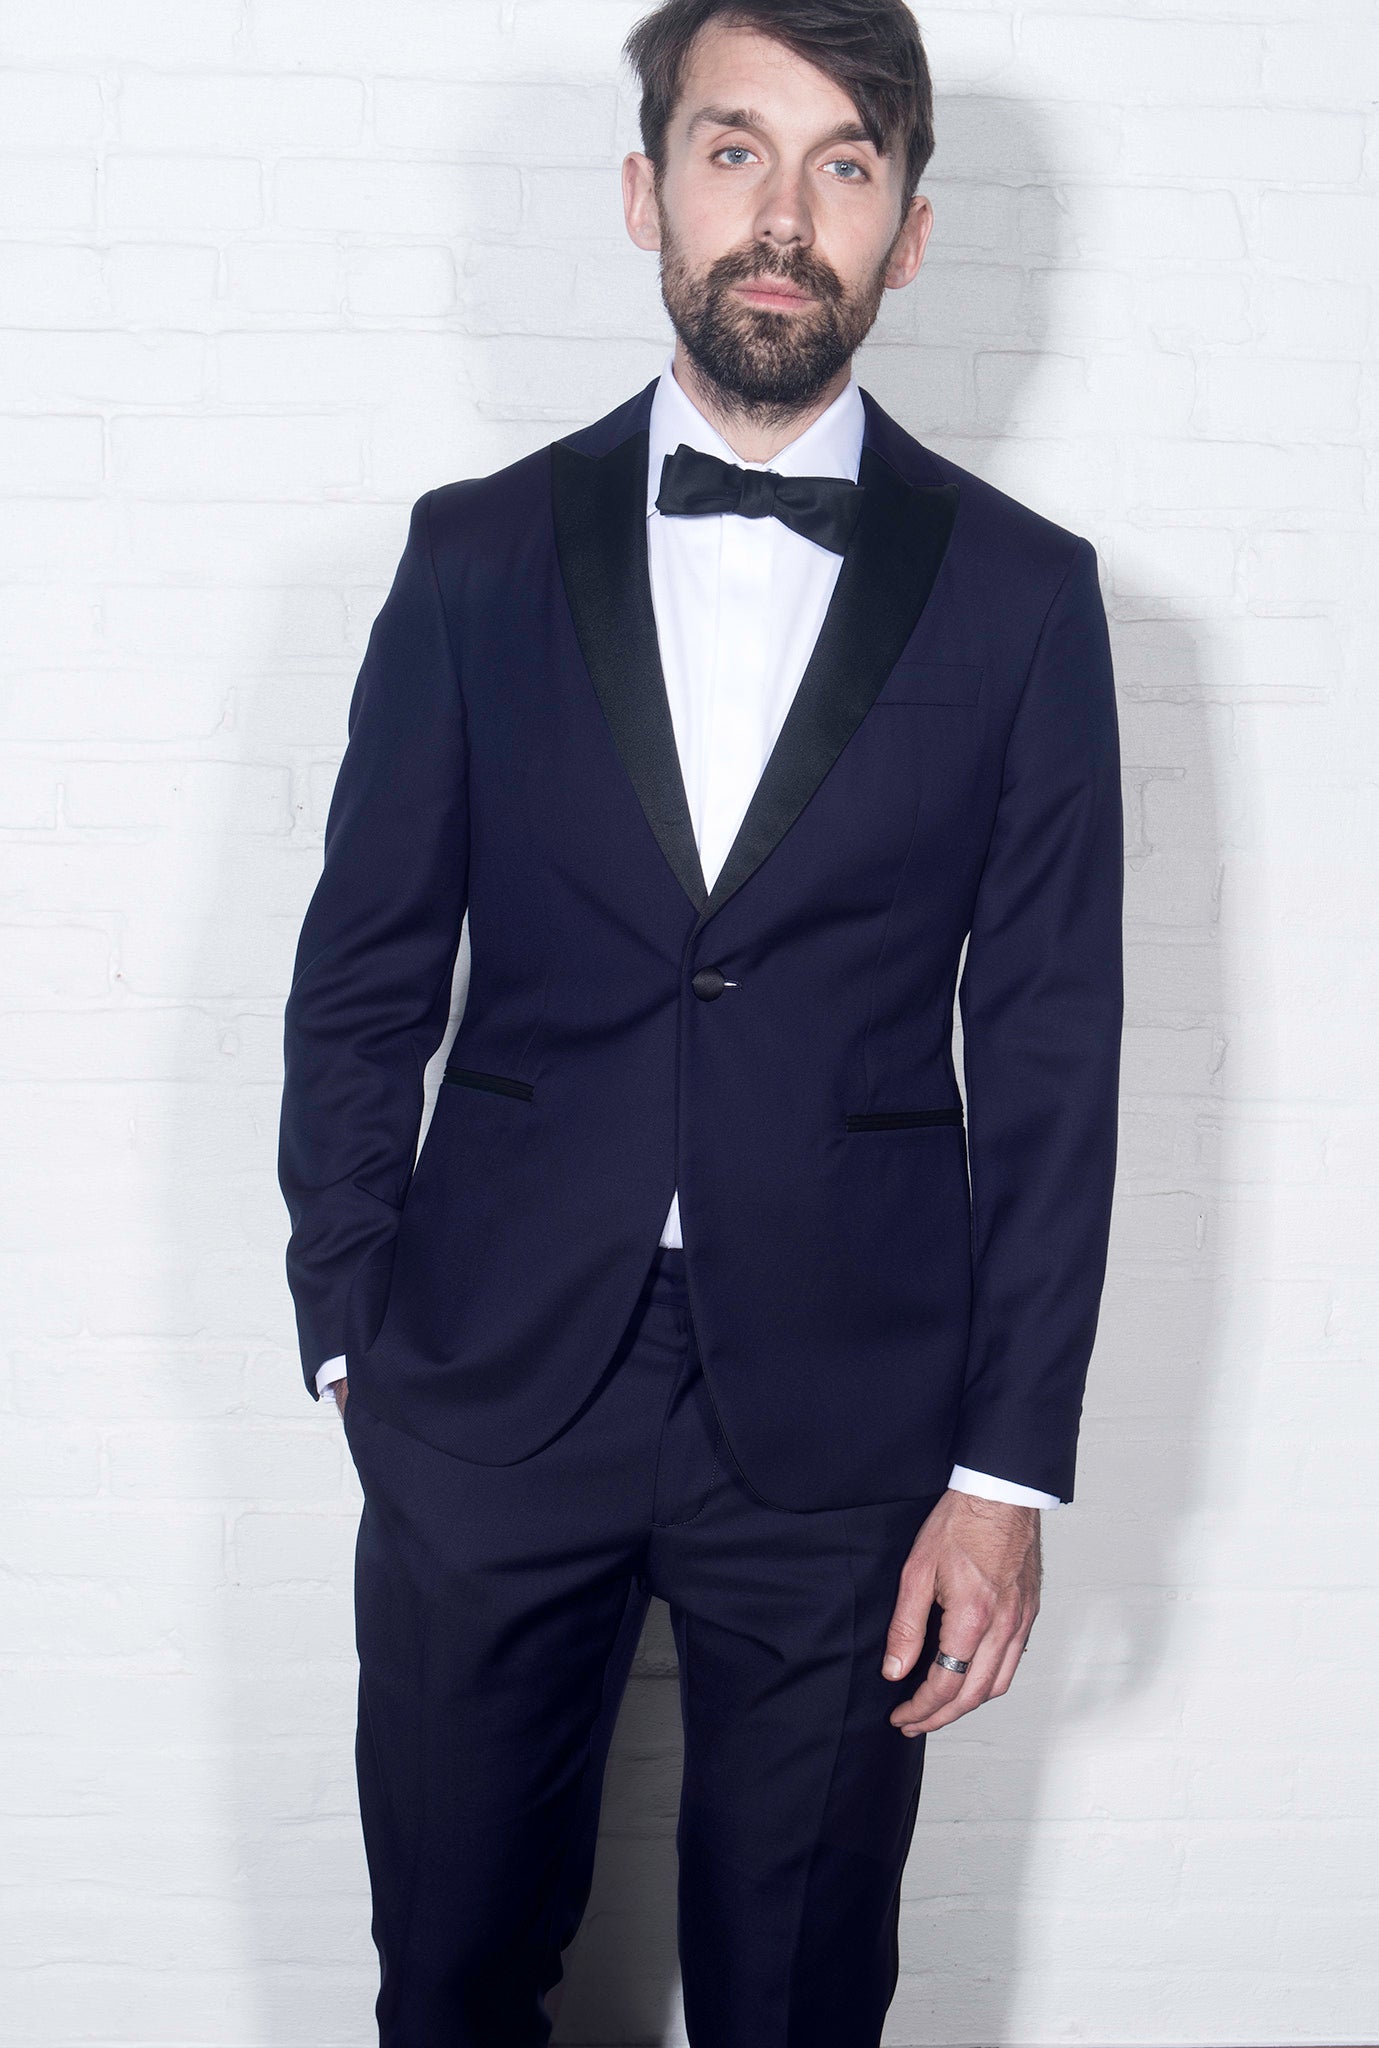 On-body shot of Brooklyn Tailors BKT50 Tuxedo Trouser in Super 110s - Navy with Satin Stripe. Model is wearing trouser with matching jacket, white tuxedo shirt, and black bowtie